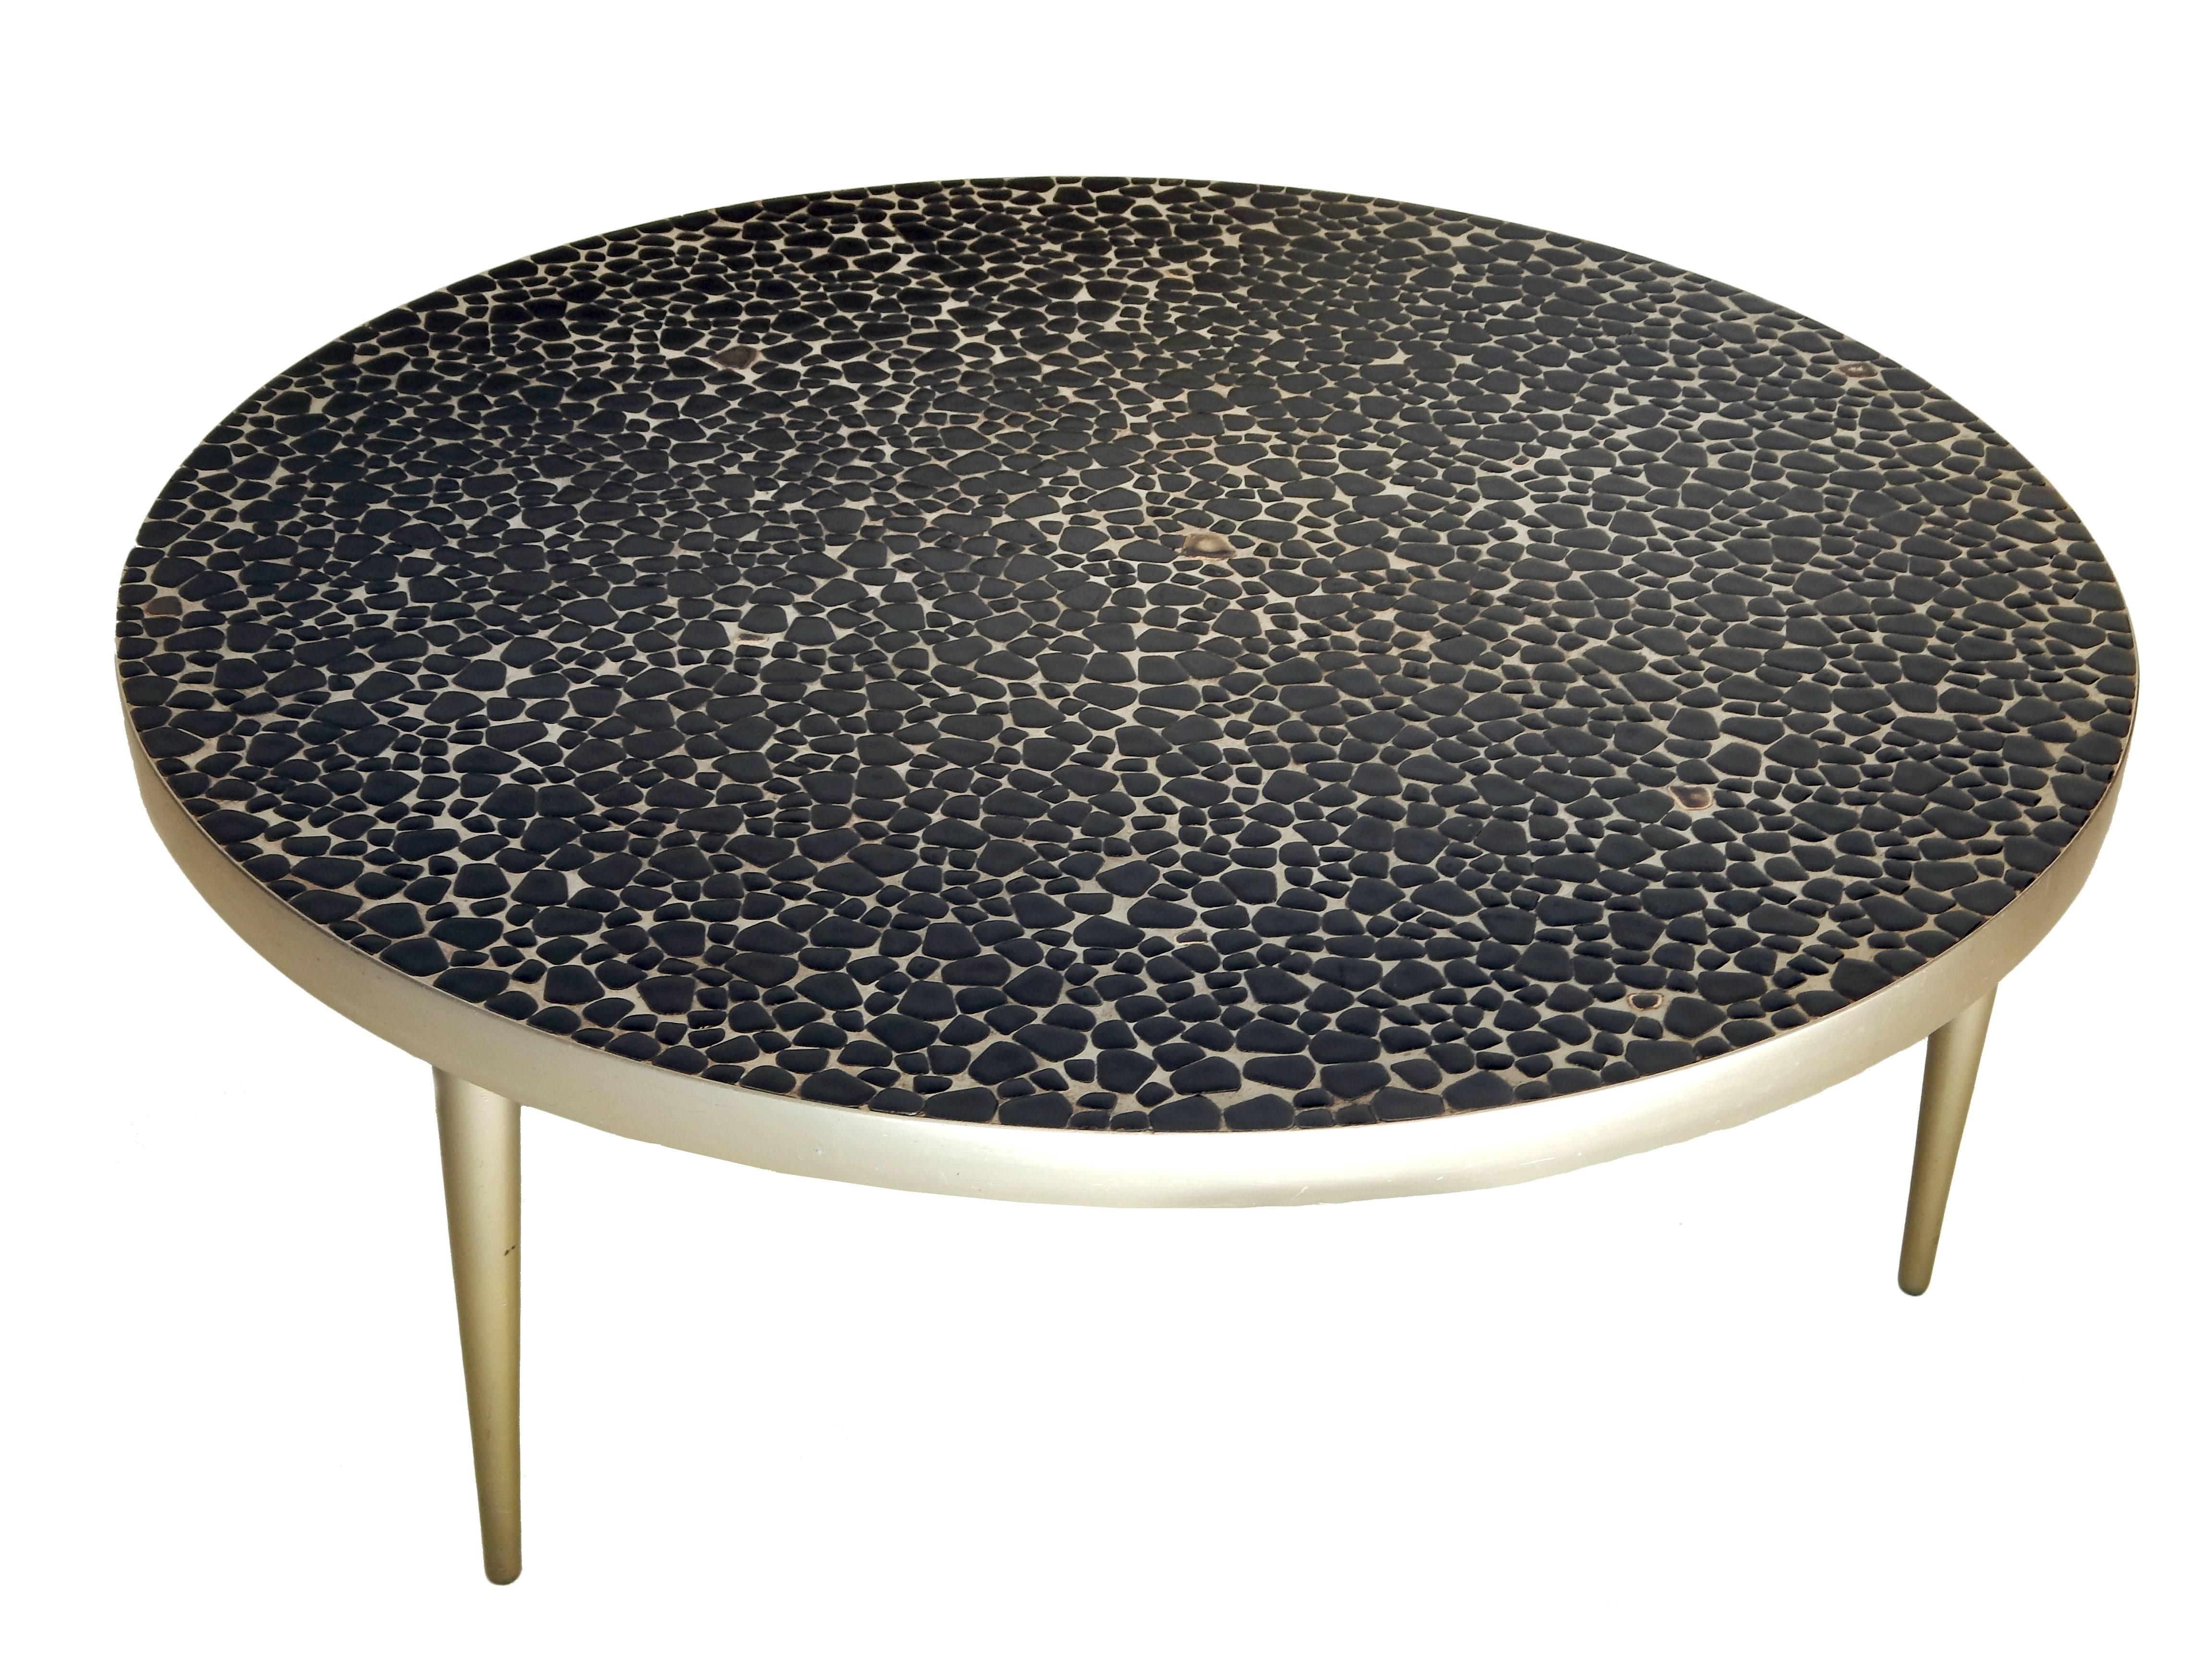 American Mid-Century Mosaic Tile Coffee Table For Sale